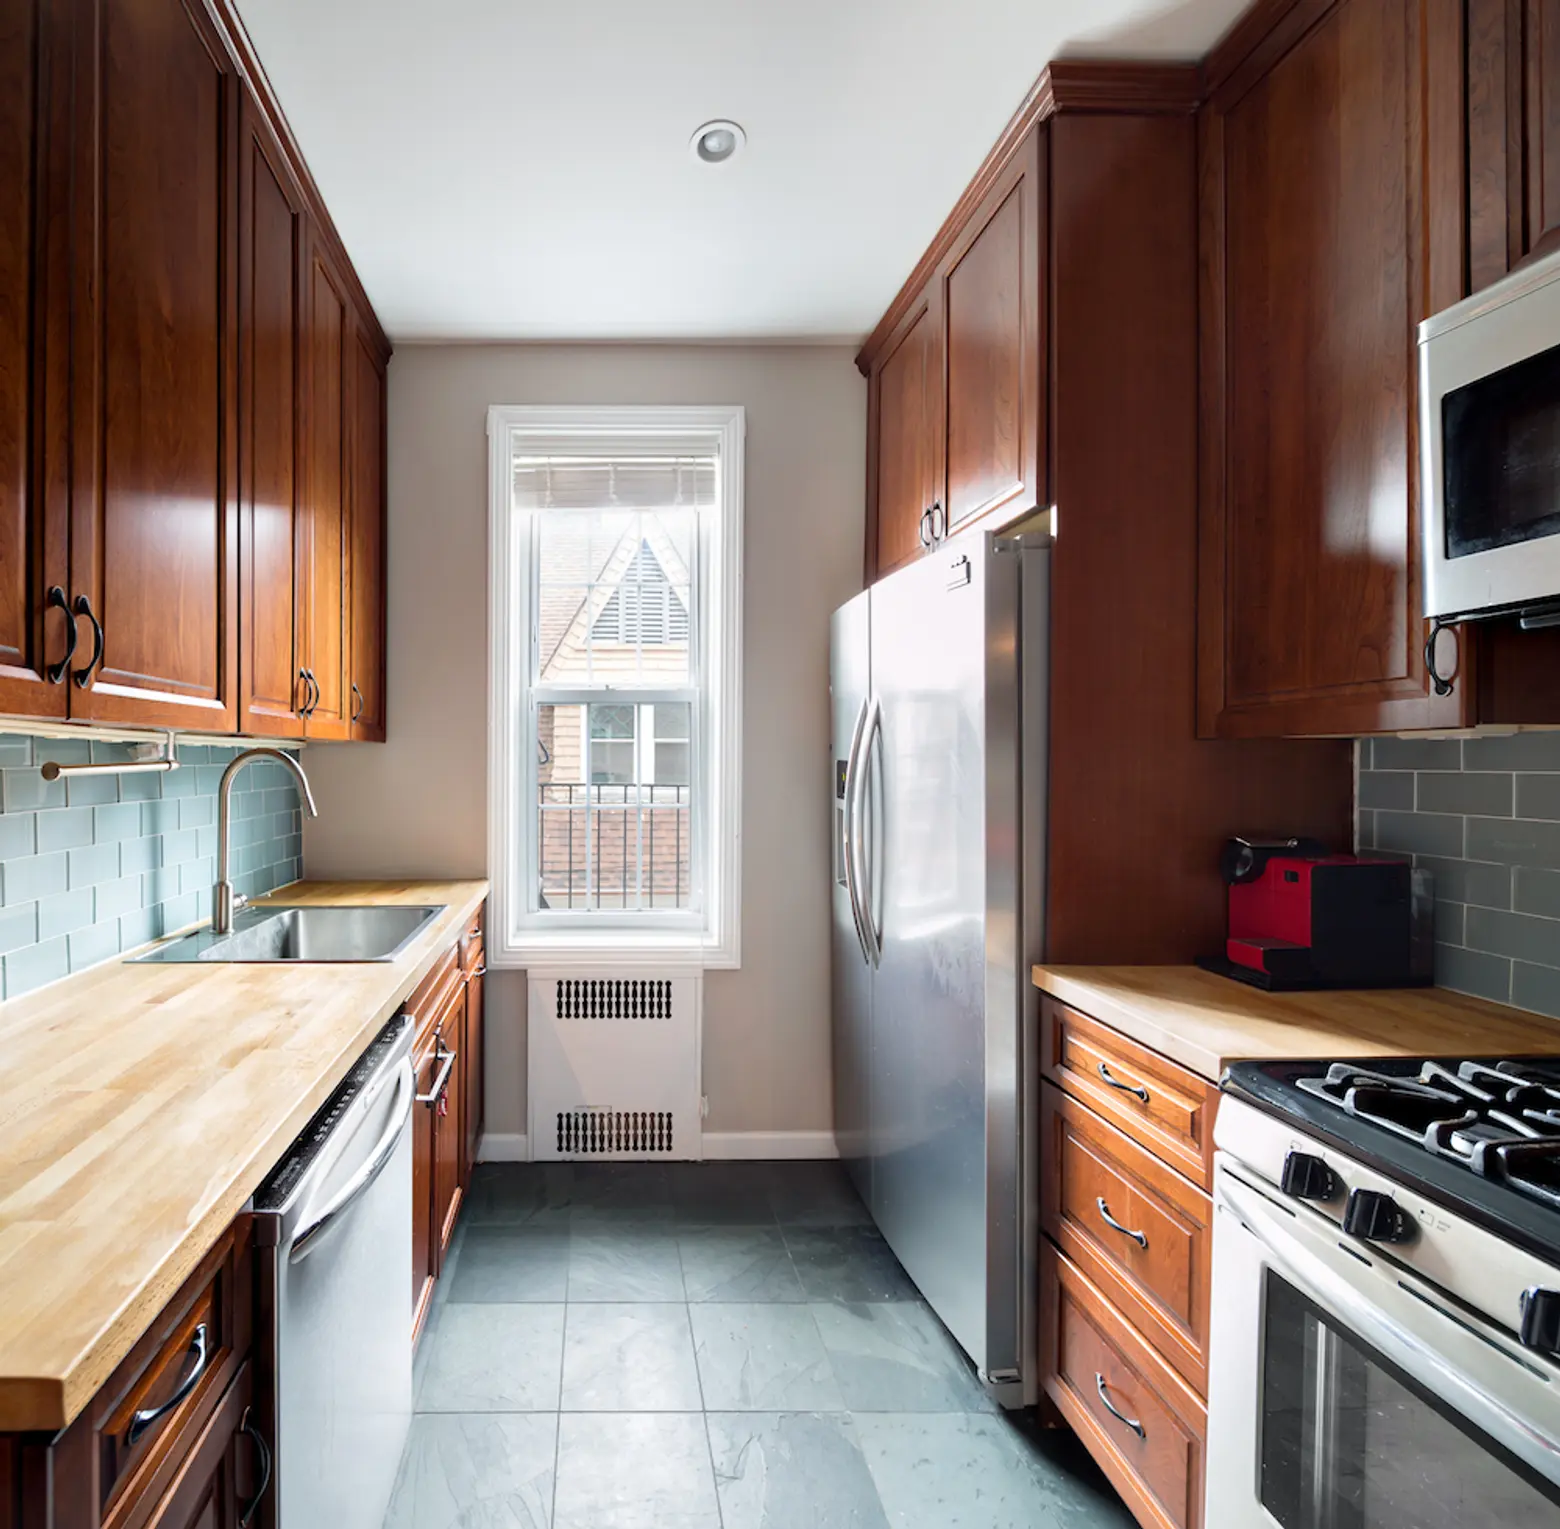 1409 Albermarle Road, Cool listings, ditmas park, Prospect Park South